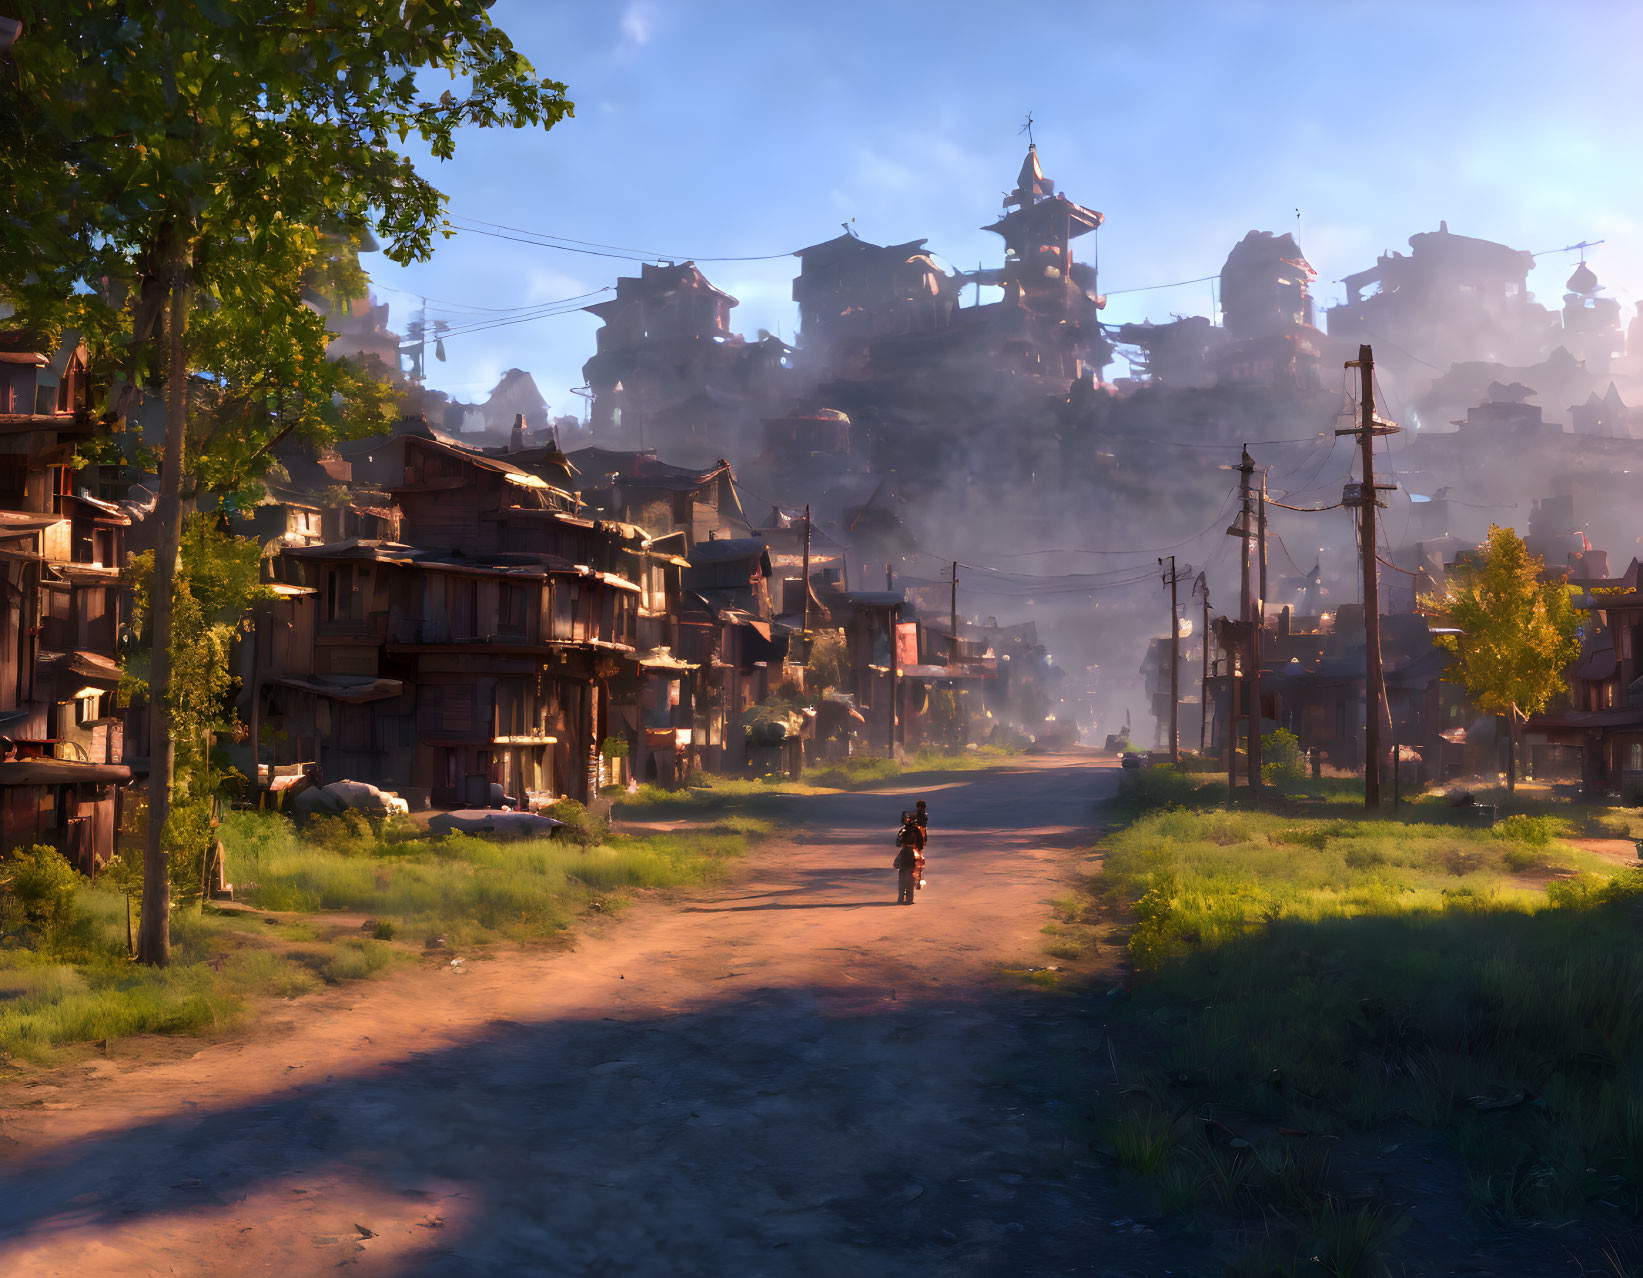 Person walking in sunlit village at sunset with rustic wooden houses